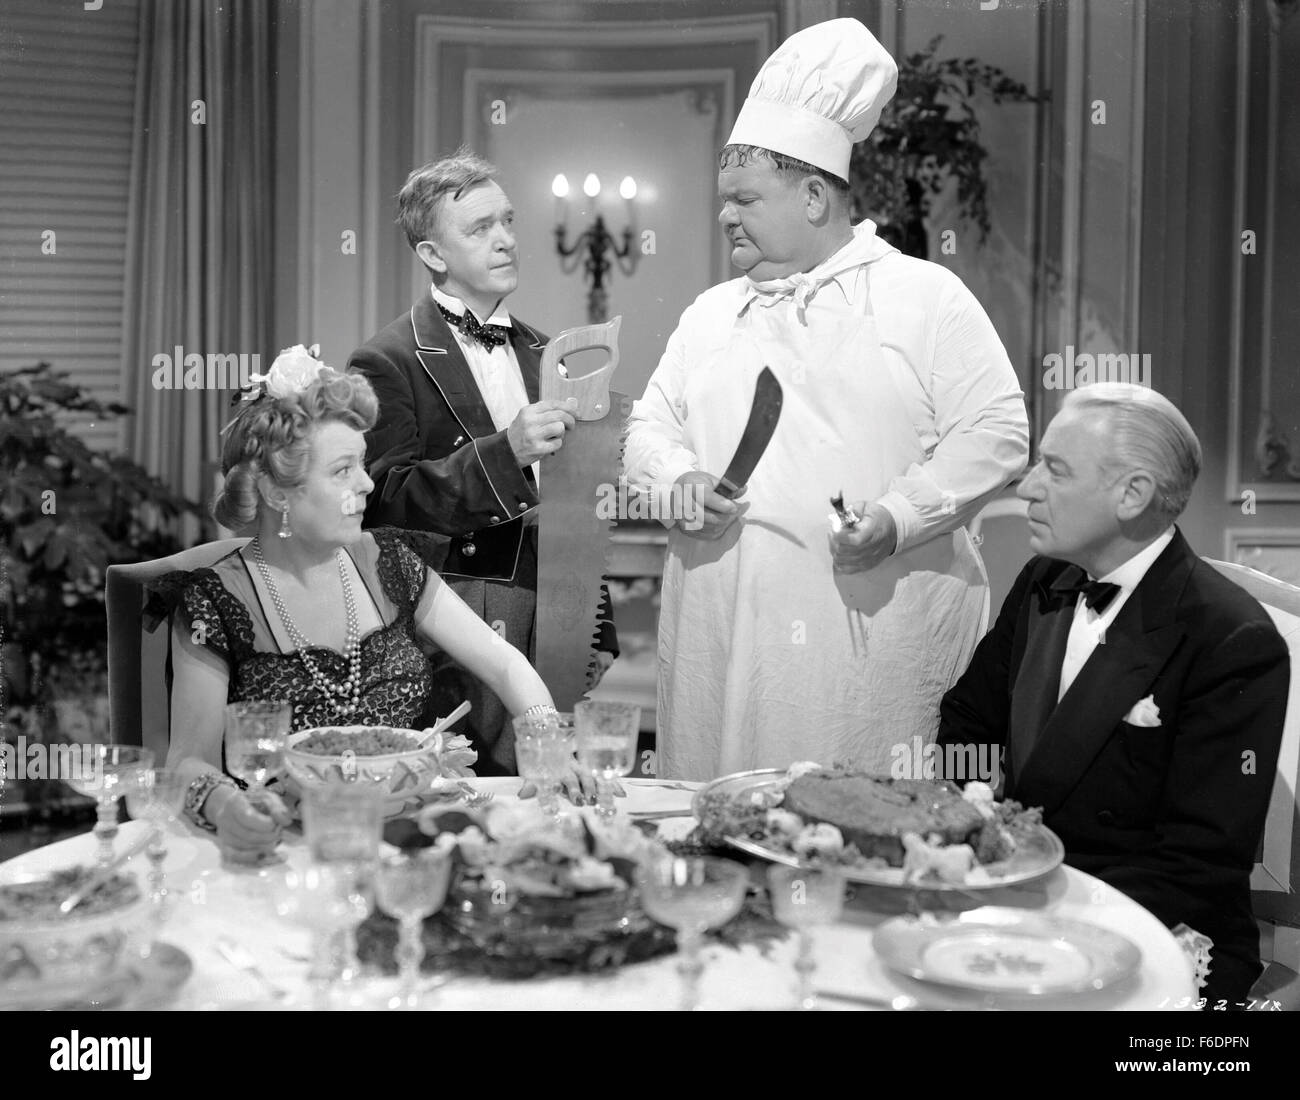 RELEASE DATE: December 6, 1944. MOVIE TITLE: Nothing But Trouble. STUDIO: Metro-Goldwyn-Mayer (MGM). PLOT: Working as chef and butler, the boys wreck a fancy dinner party and, in the process, accidently foil a plot, by enemy agents, to poison a young exiled king. PICTURED: STAN LAUREL as Stan and OLIVER HARDY as Ollie. Stock Photo